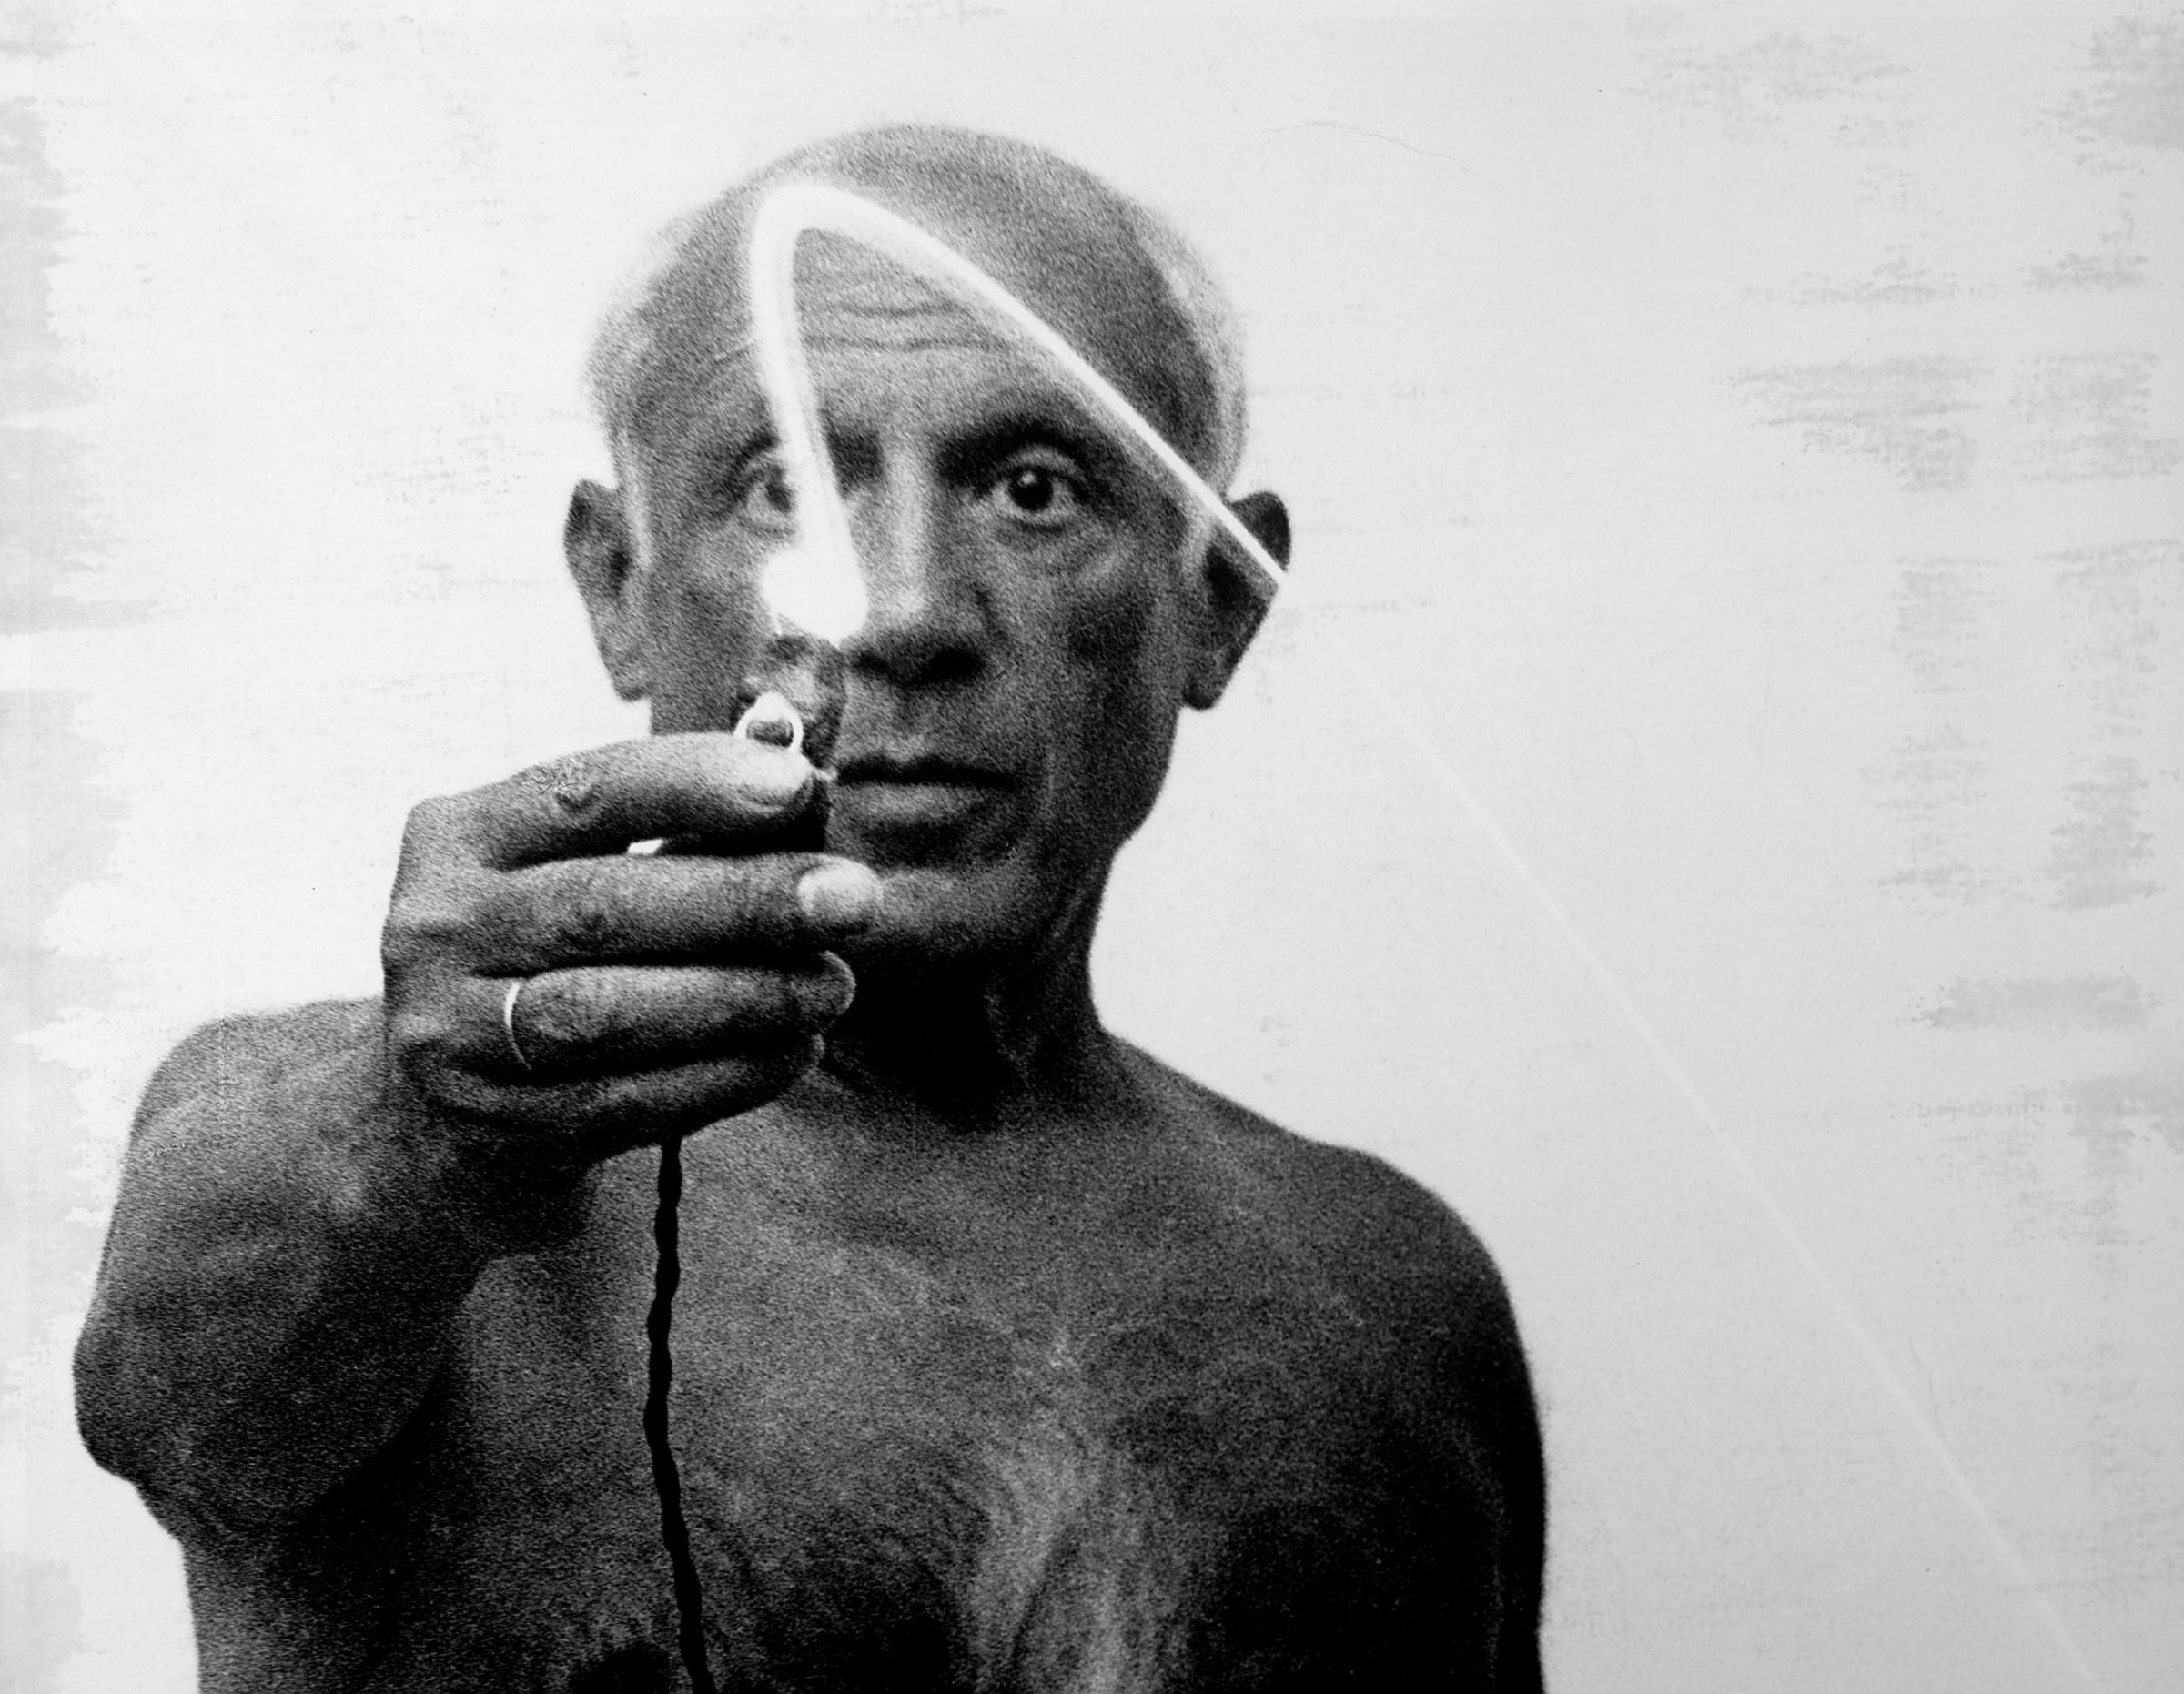 Pablo Picasso, south of France, 1949.